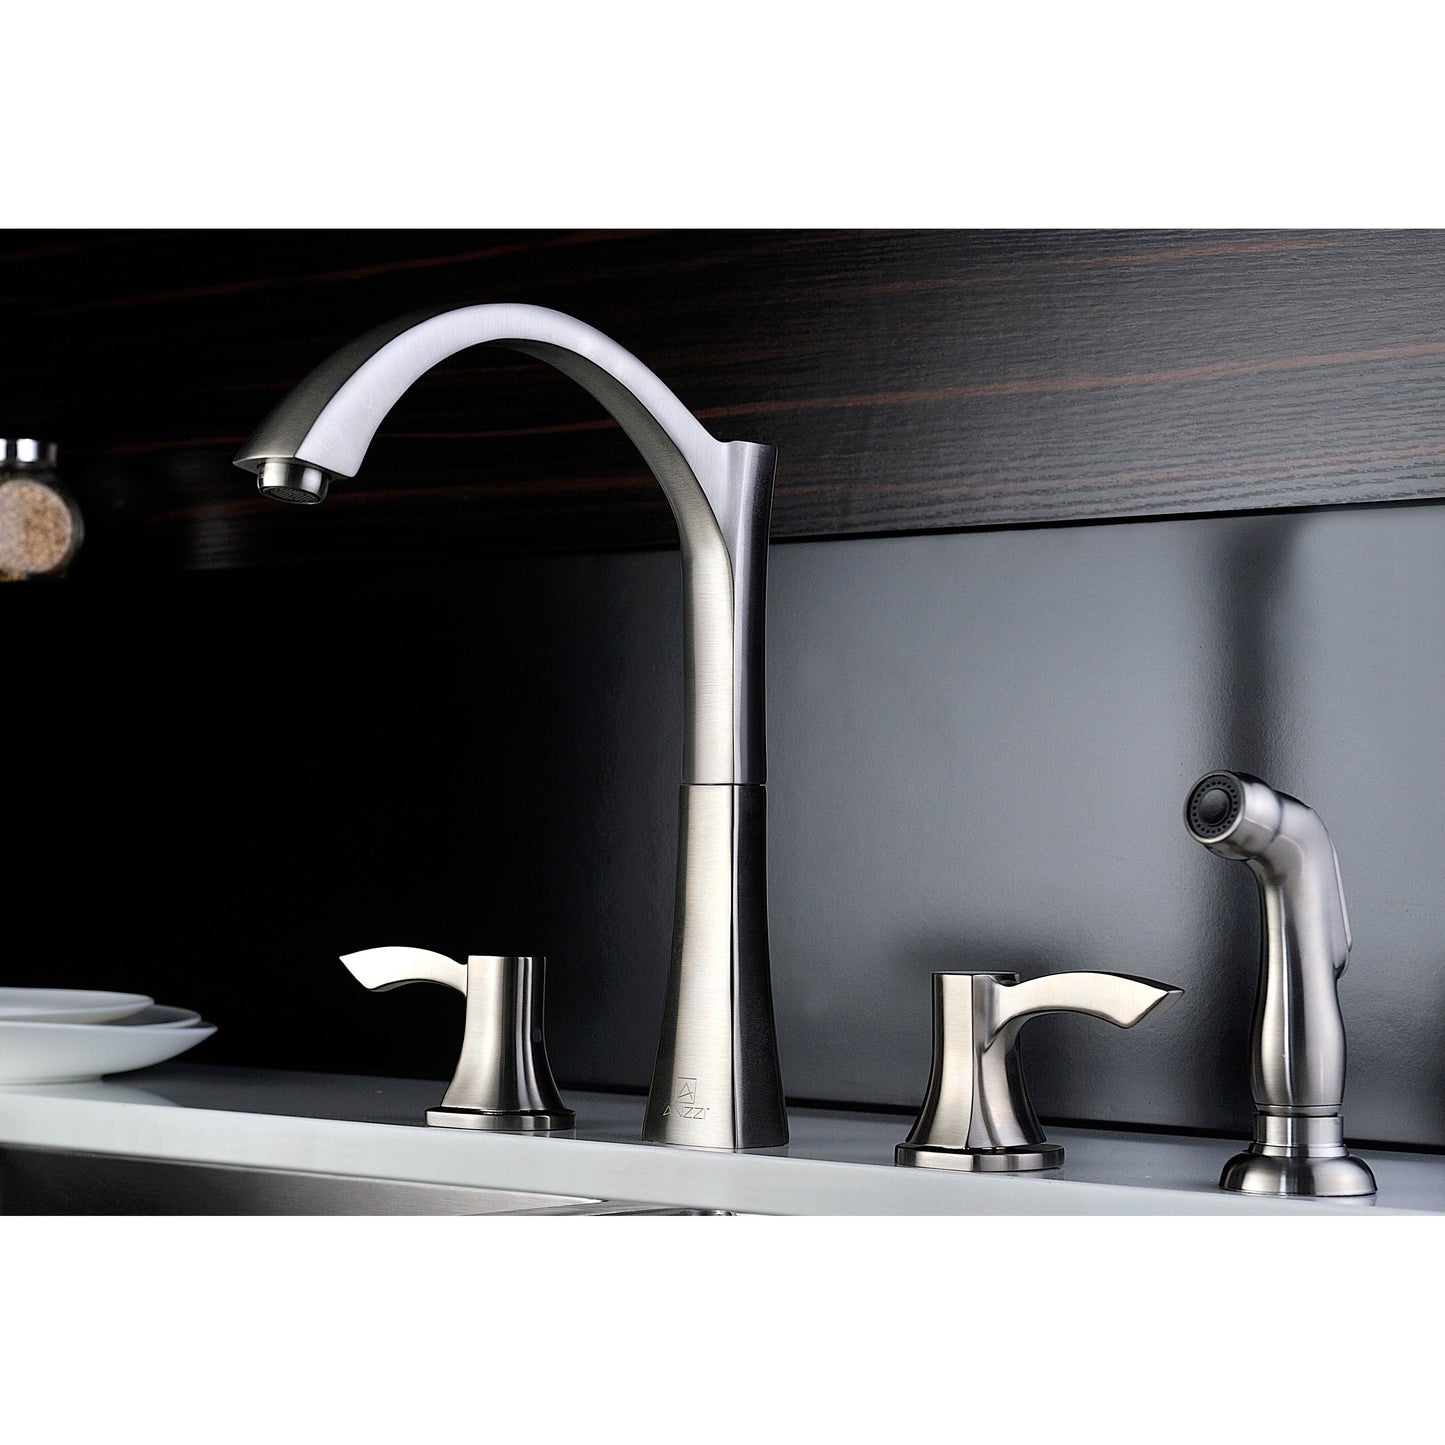 ANZZI Elysian Series 33" Double Basin 60/40 Stainless Steel Farmhouse Kitchen Sink With Strainer, Drain Assembly and Brushed Nickel Soave Faucet